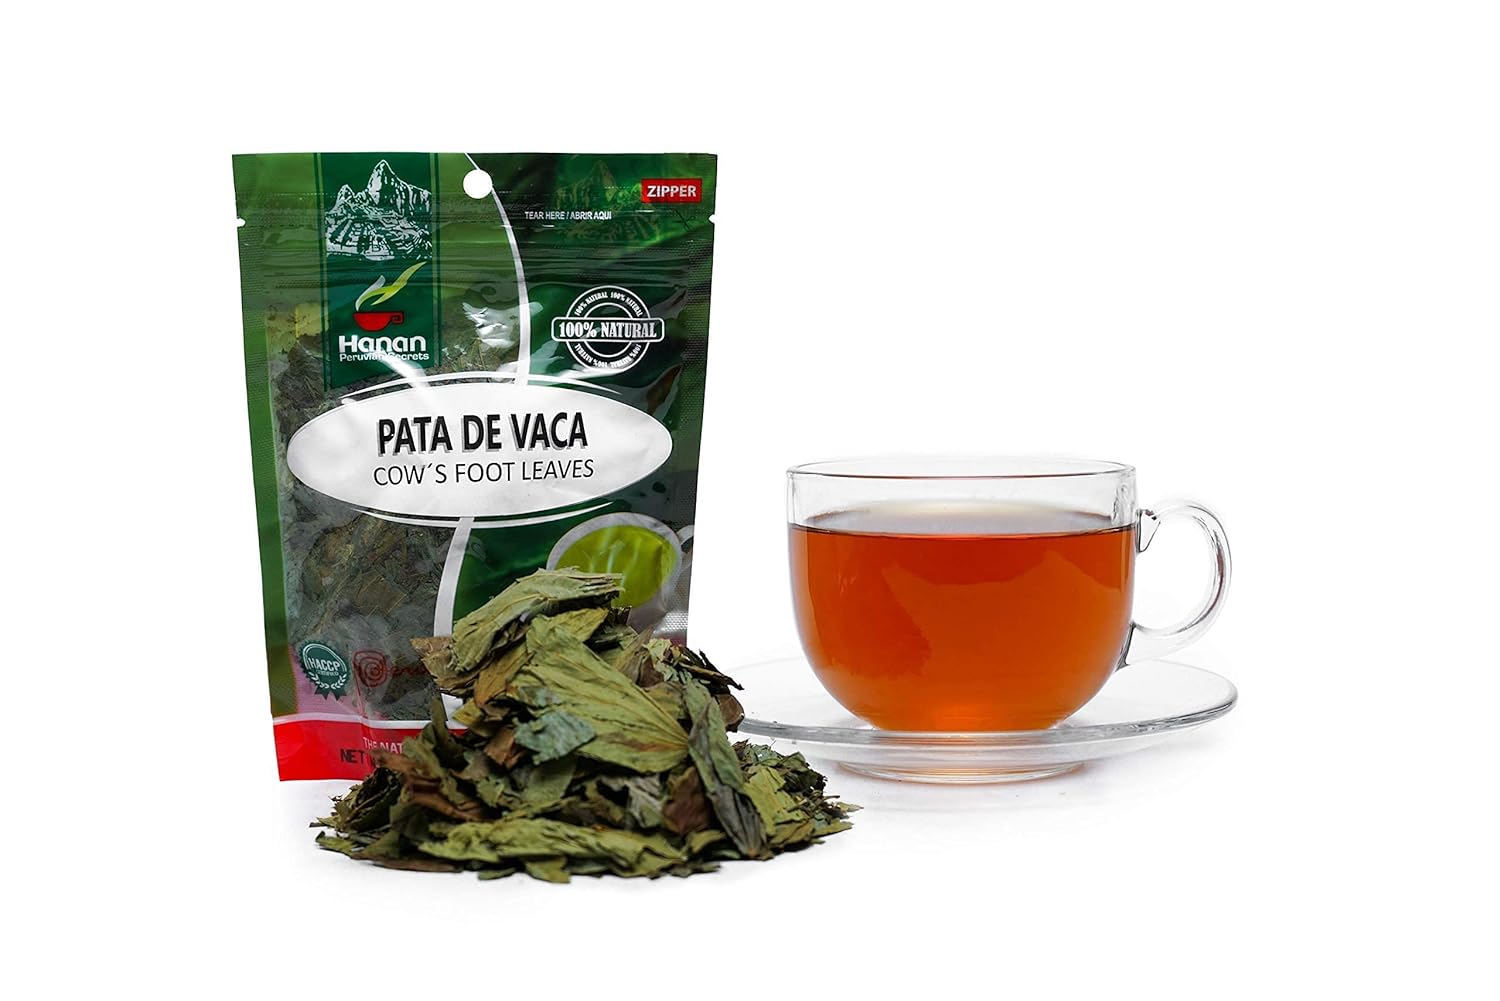 Cow's foot Loose (Pata de Vaca) Leaf Tea | 100% All-Natural Bauhinia forficata Leaves from Peru traditionally used to promotes overall health and well-being | 1.41oz (40g)